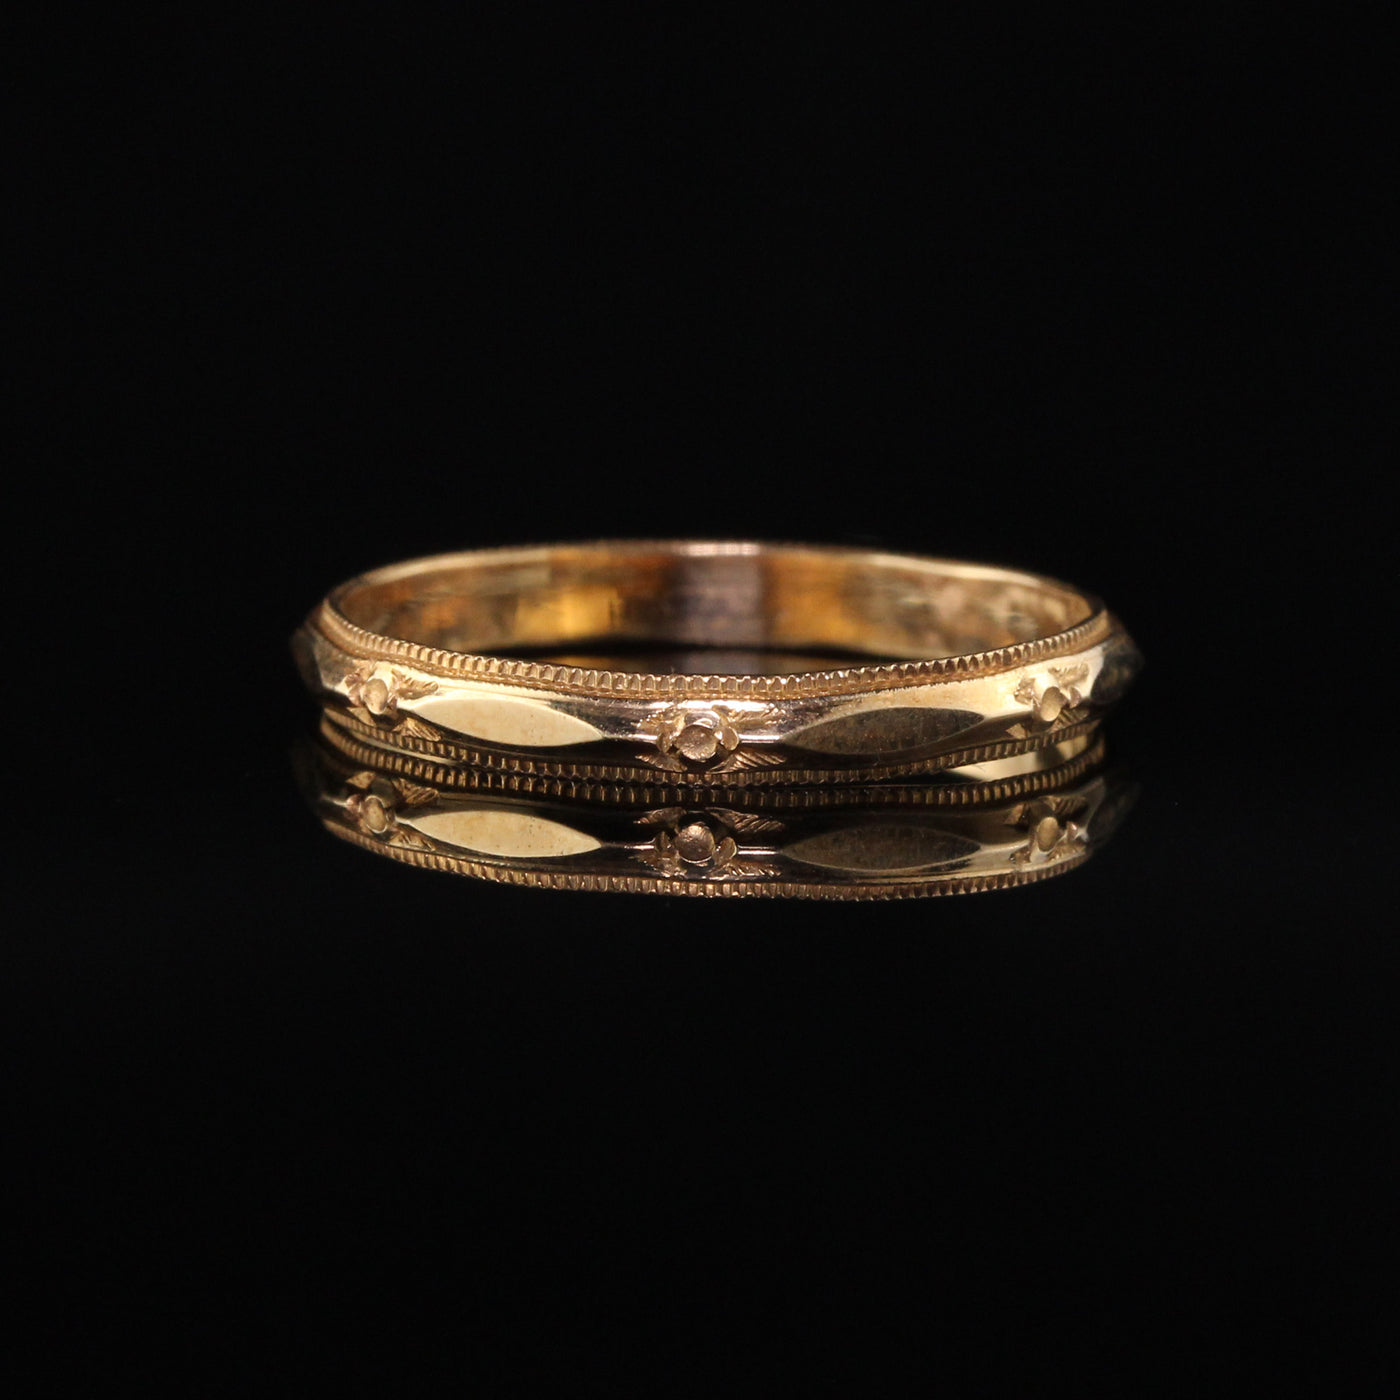 Antique Art Deco 14K Yellow Gold Engraved Wedding Band - Size 6 1/2